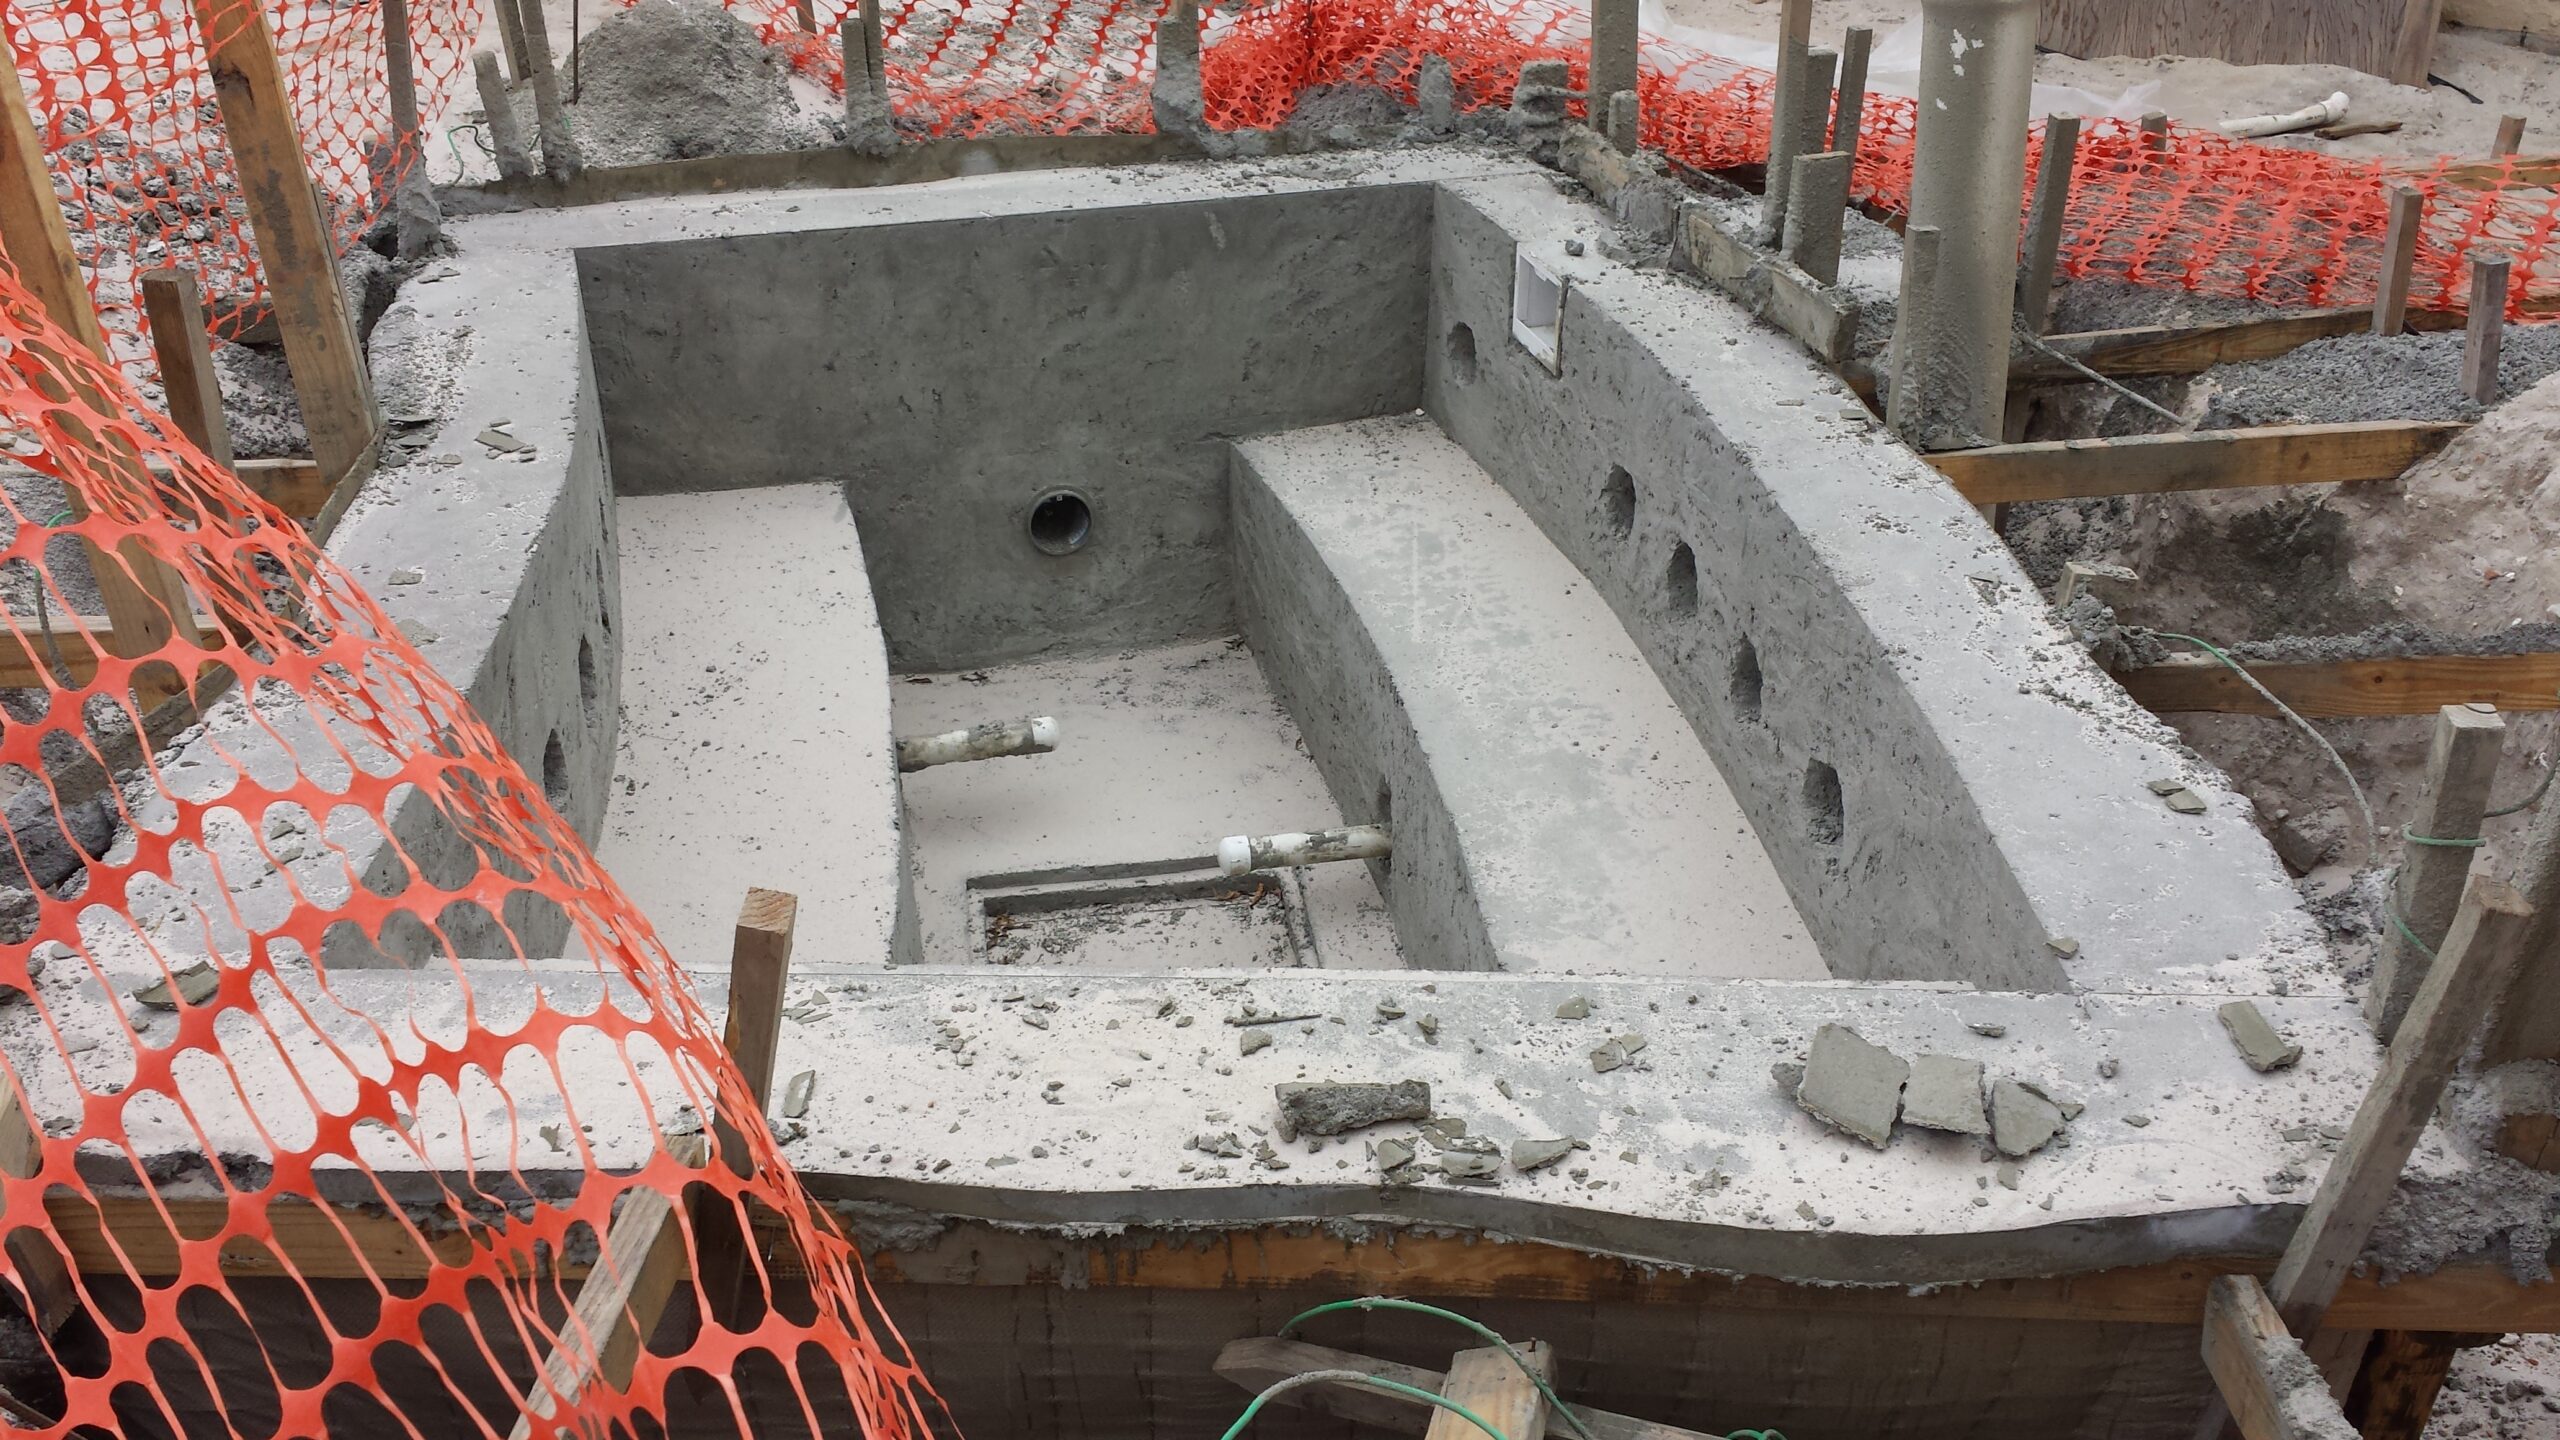 A jacuzzi being built